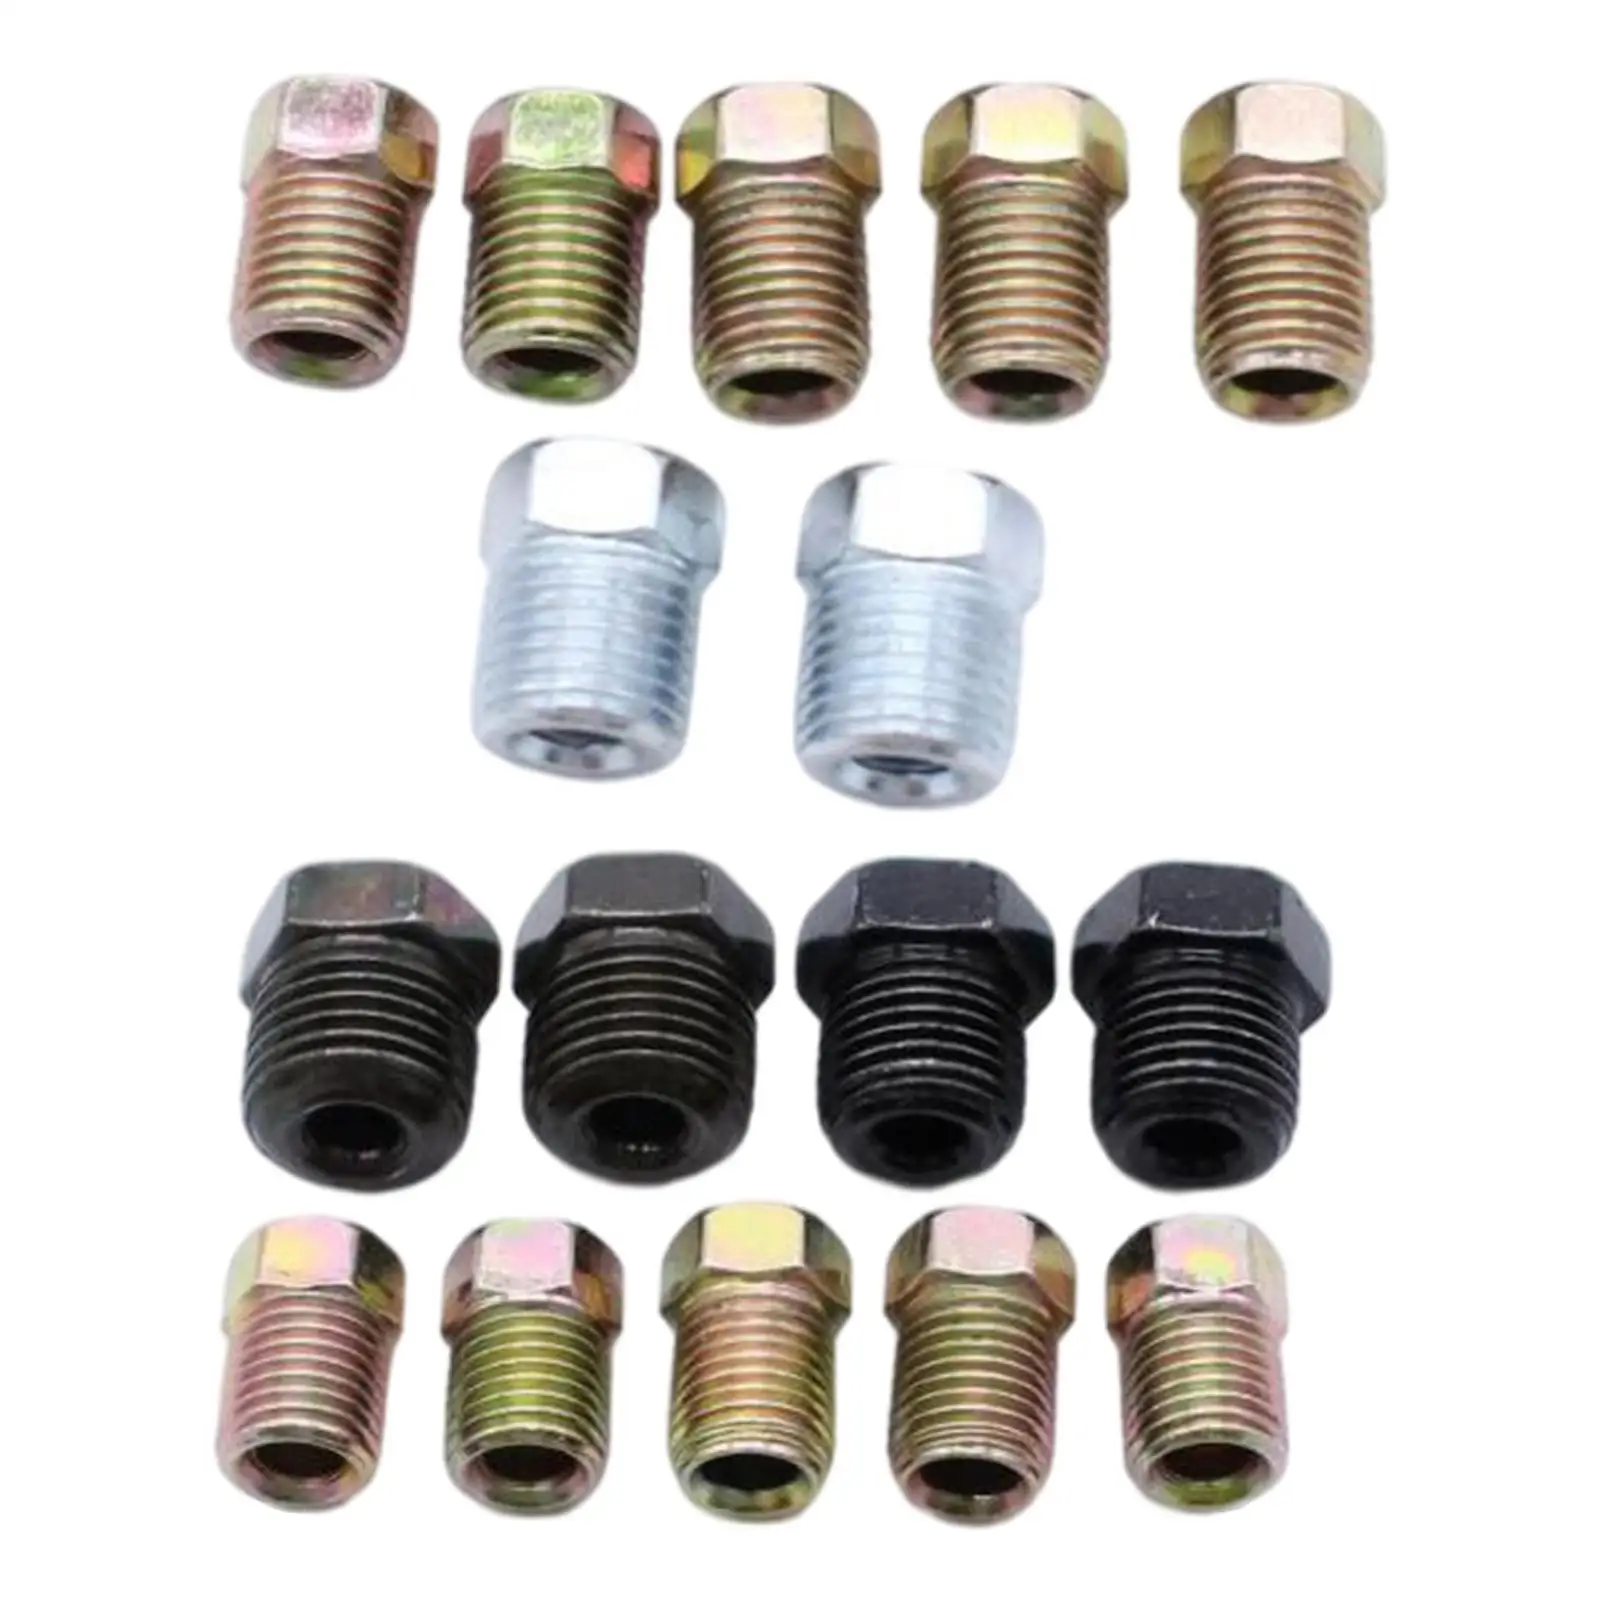 16-Pack Inverted  Tube Nuts 2x 7/16-24 for 3/16 Tube Accessories